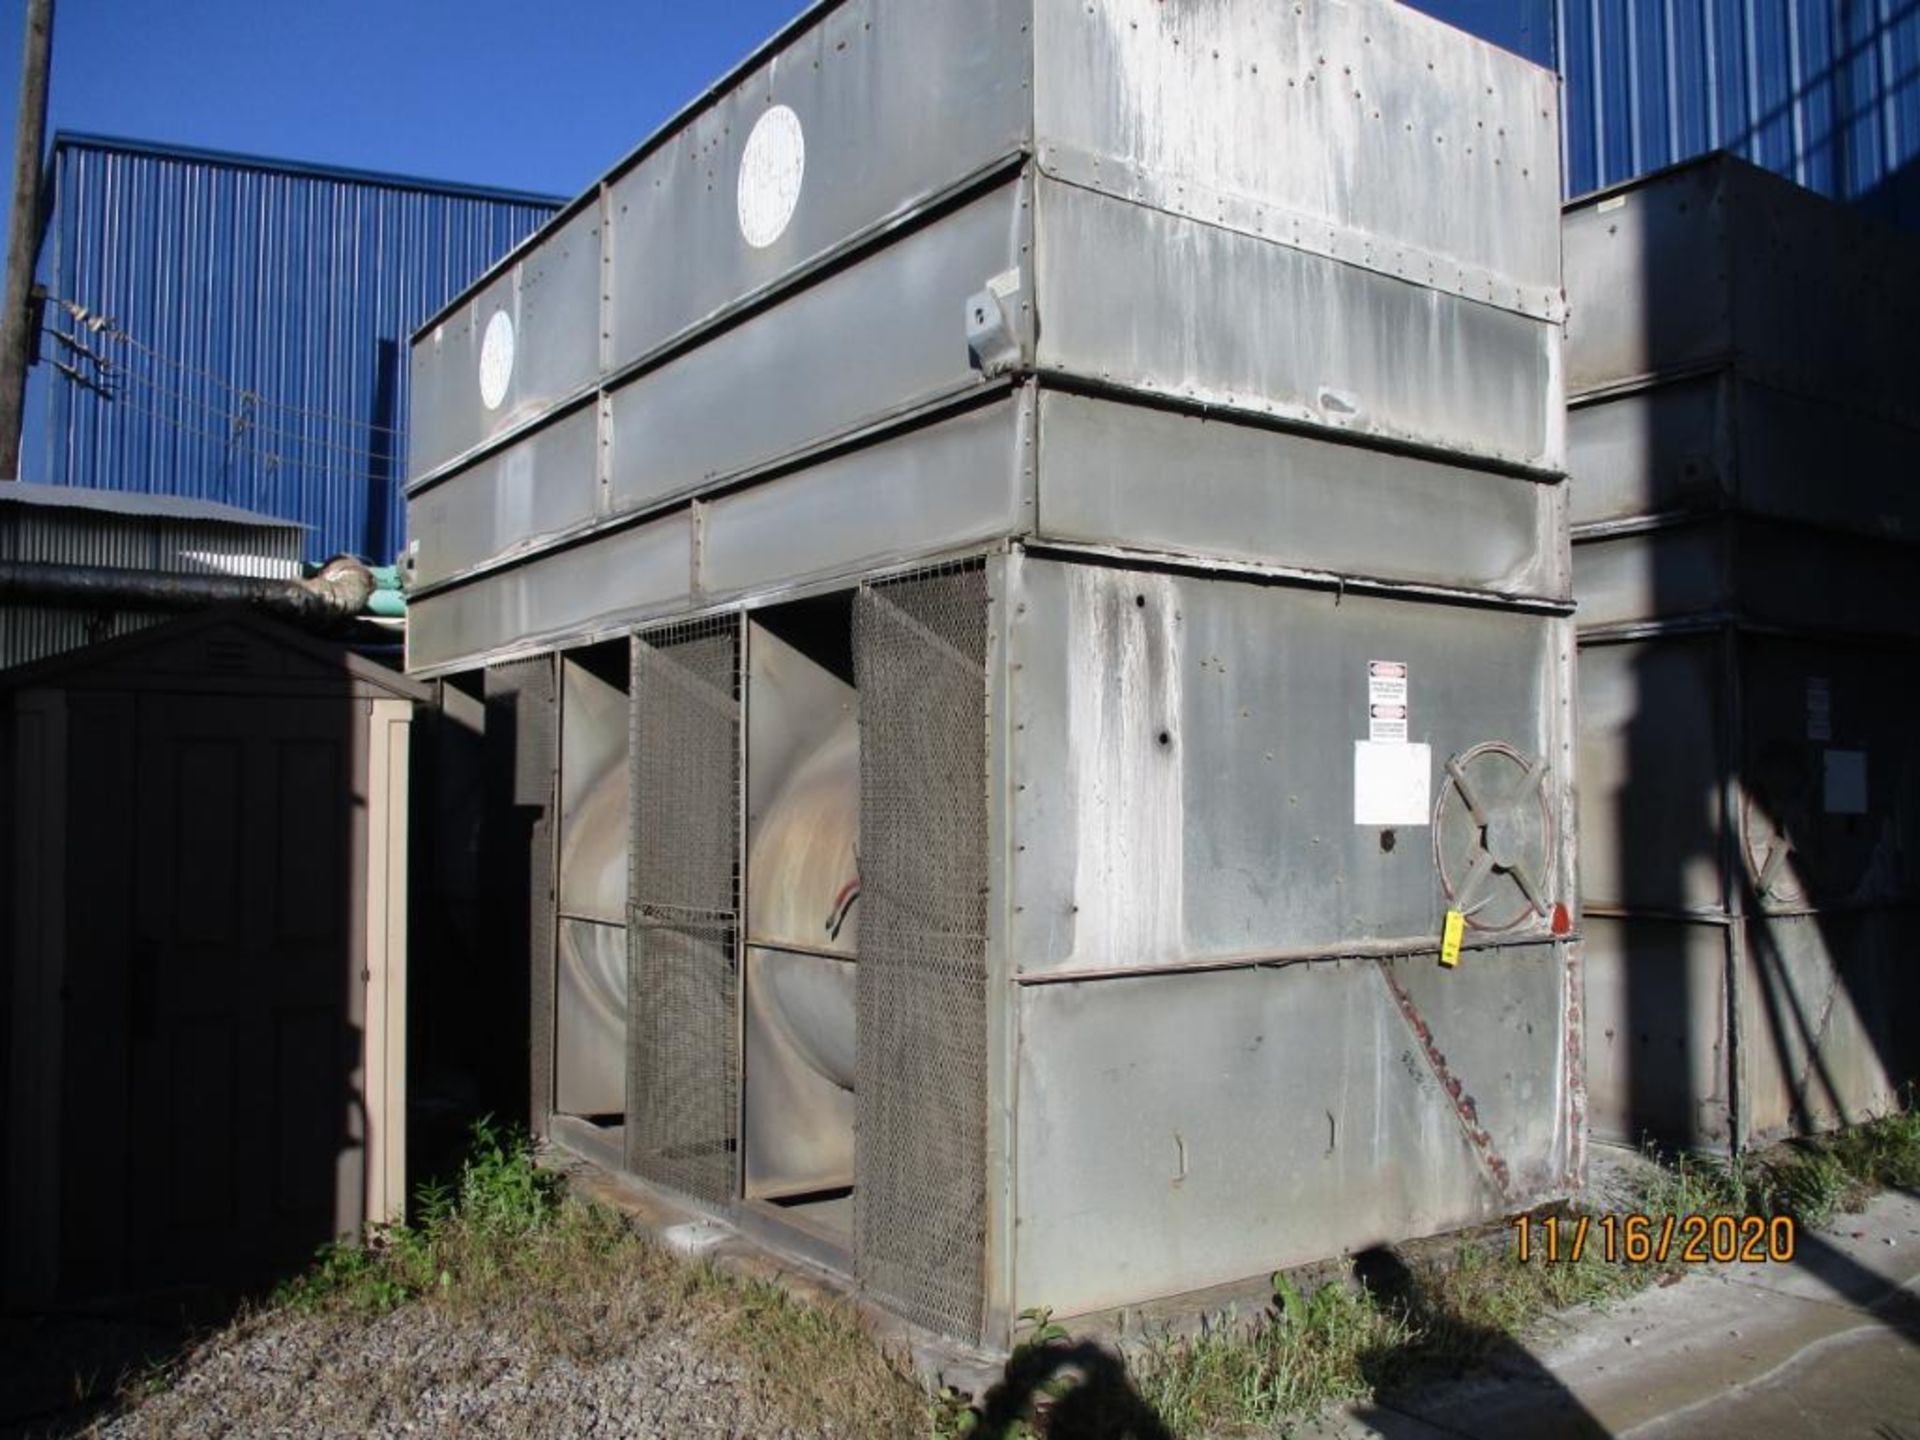 BAC 3-Fan Cooling Tower Model F1402-PX, S/N 97100512 (LOCATED IN COLUMBIANA, AL) - Image 2 of 2